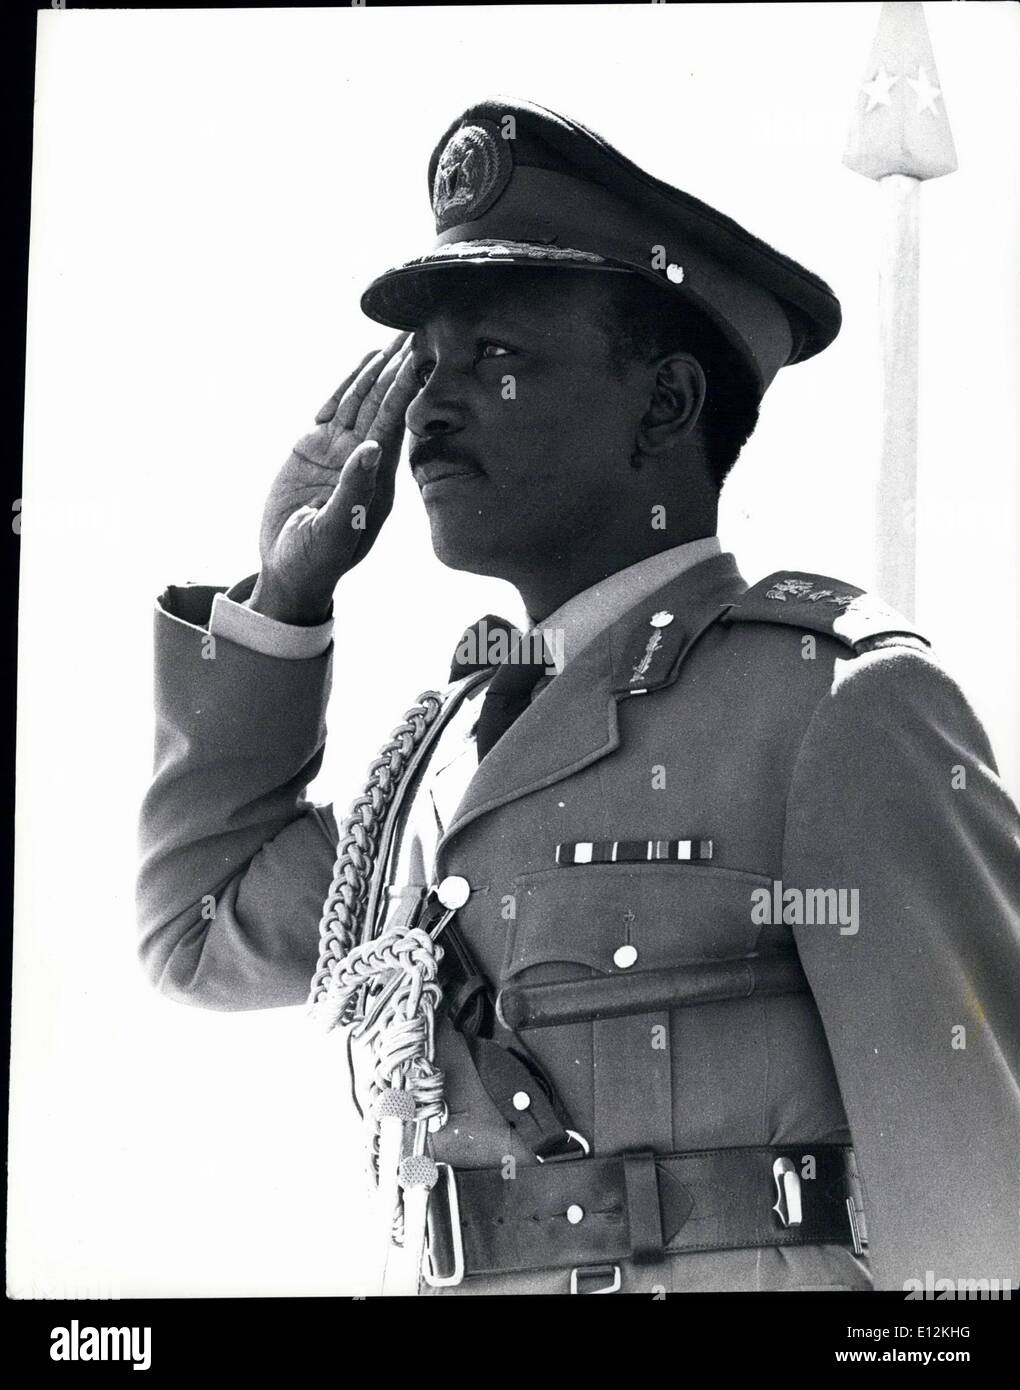 Feb. 24, 2012 - Major-General Yakubu Gowon, President of Nigeria. Born, Bebue Plateau State, 1934. Educated at St. Bartholomew's School, Government College Zaria, Sandhurst, Cambereley. Adjutant, Nigerian Army, 1960. Lieutenant-Colonel and Adjutant-General, 1966. Commander in Chief, 1966. President of the Supreme Military Council, 1967. Stock Photo